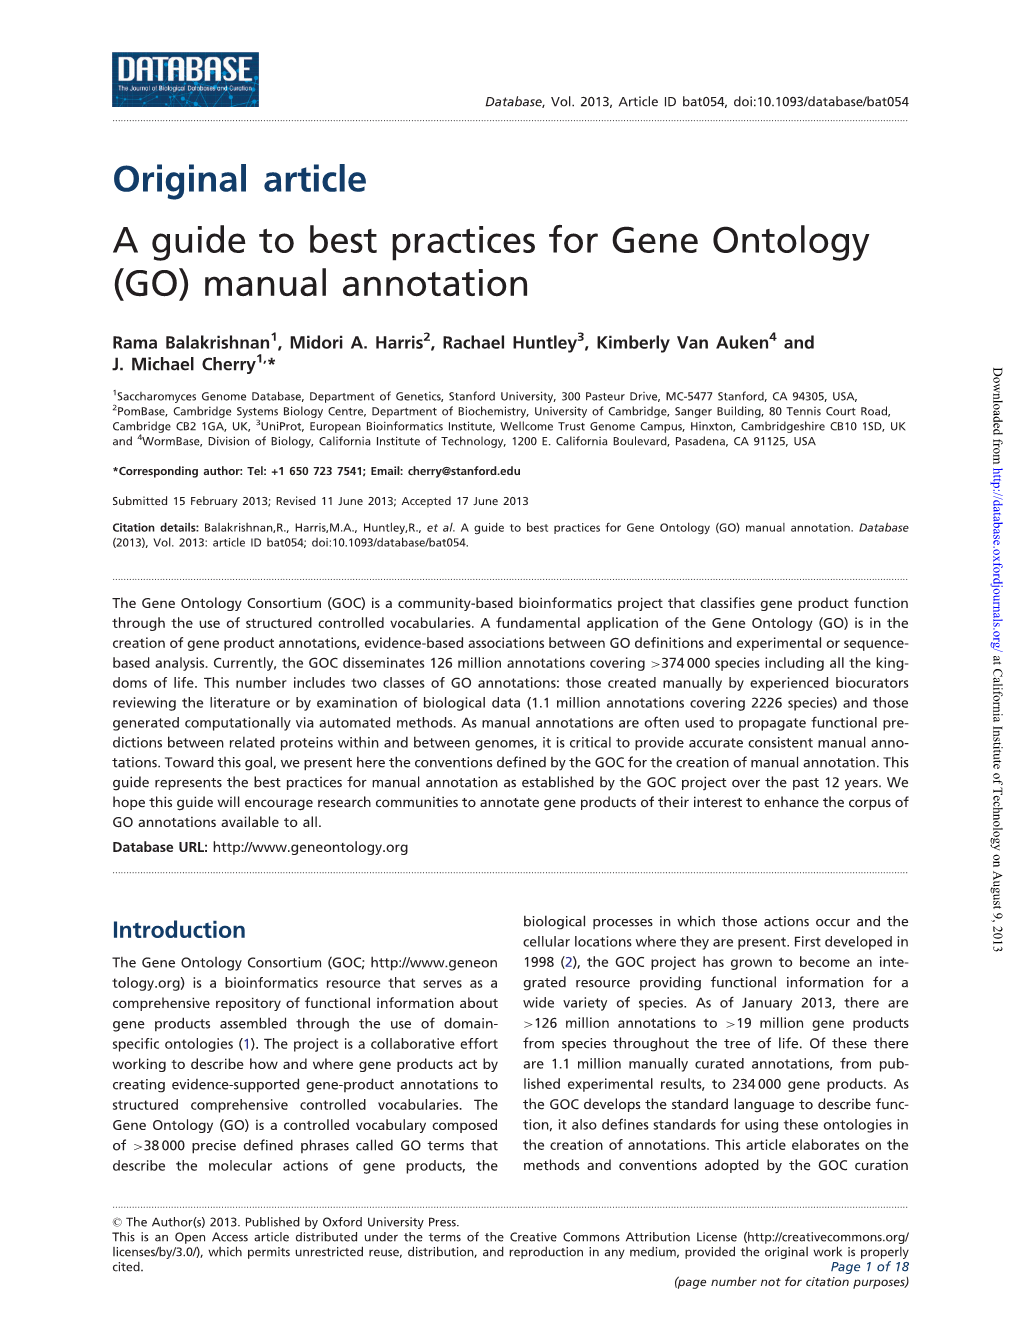 A Guide to Best Practices for Gene Ontology (GO) Manual Annotation